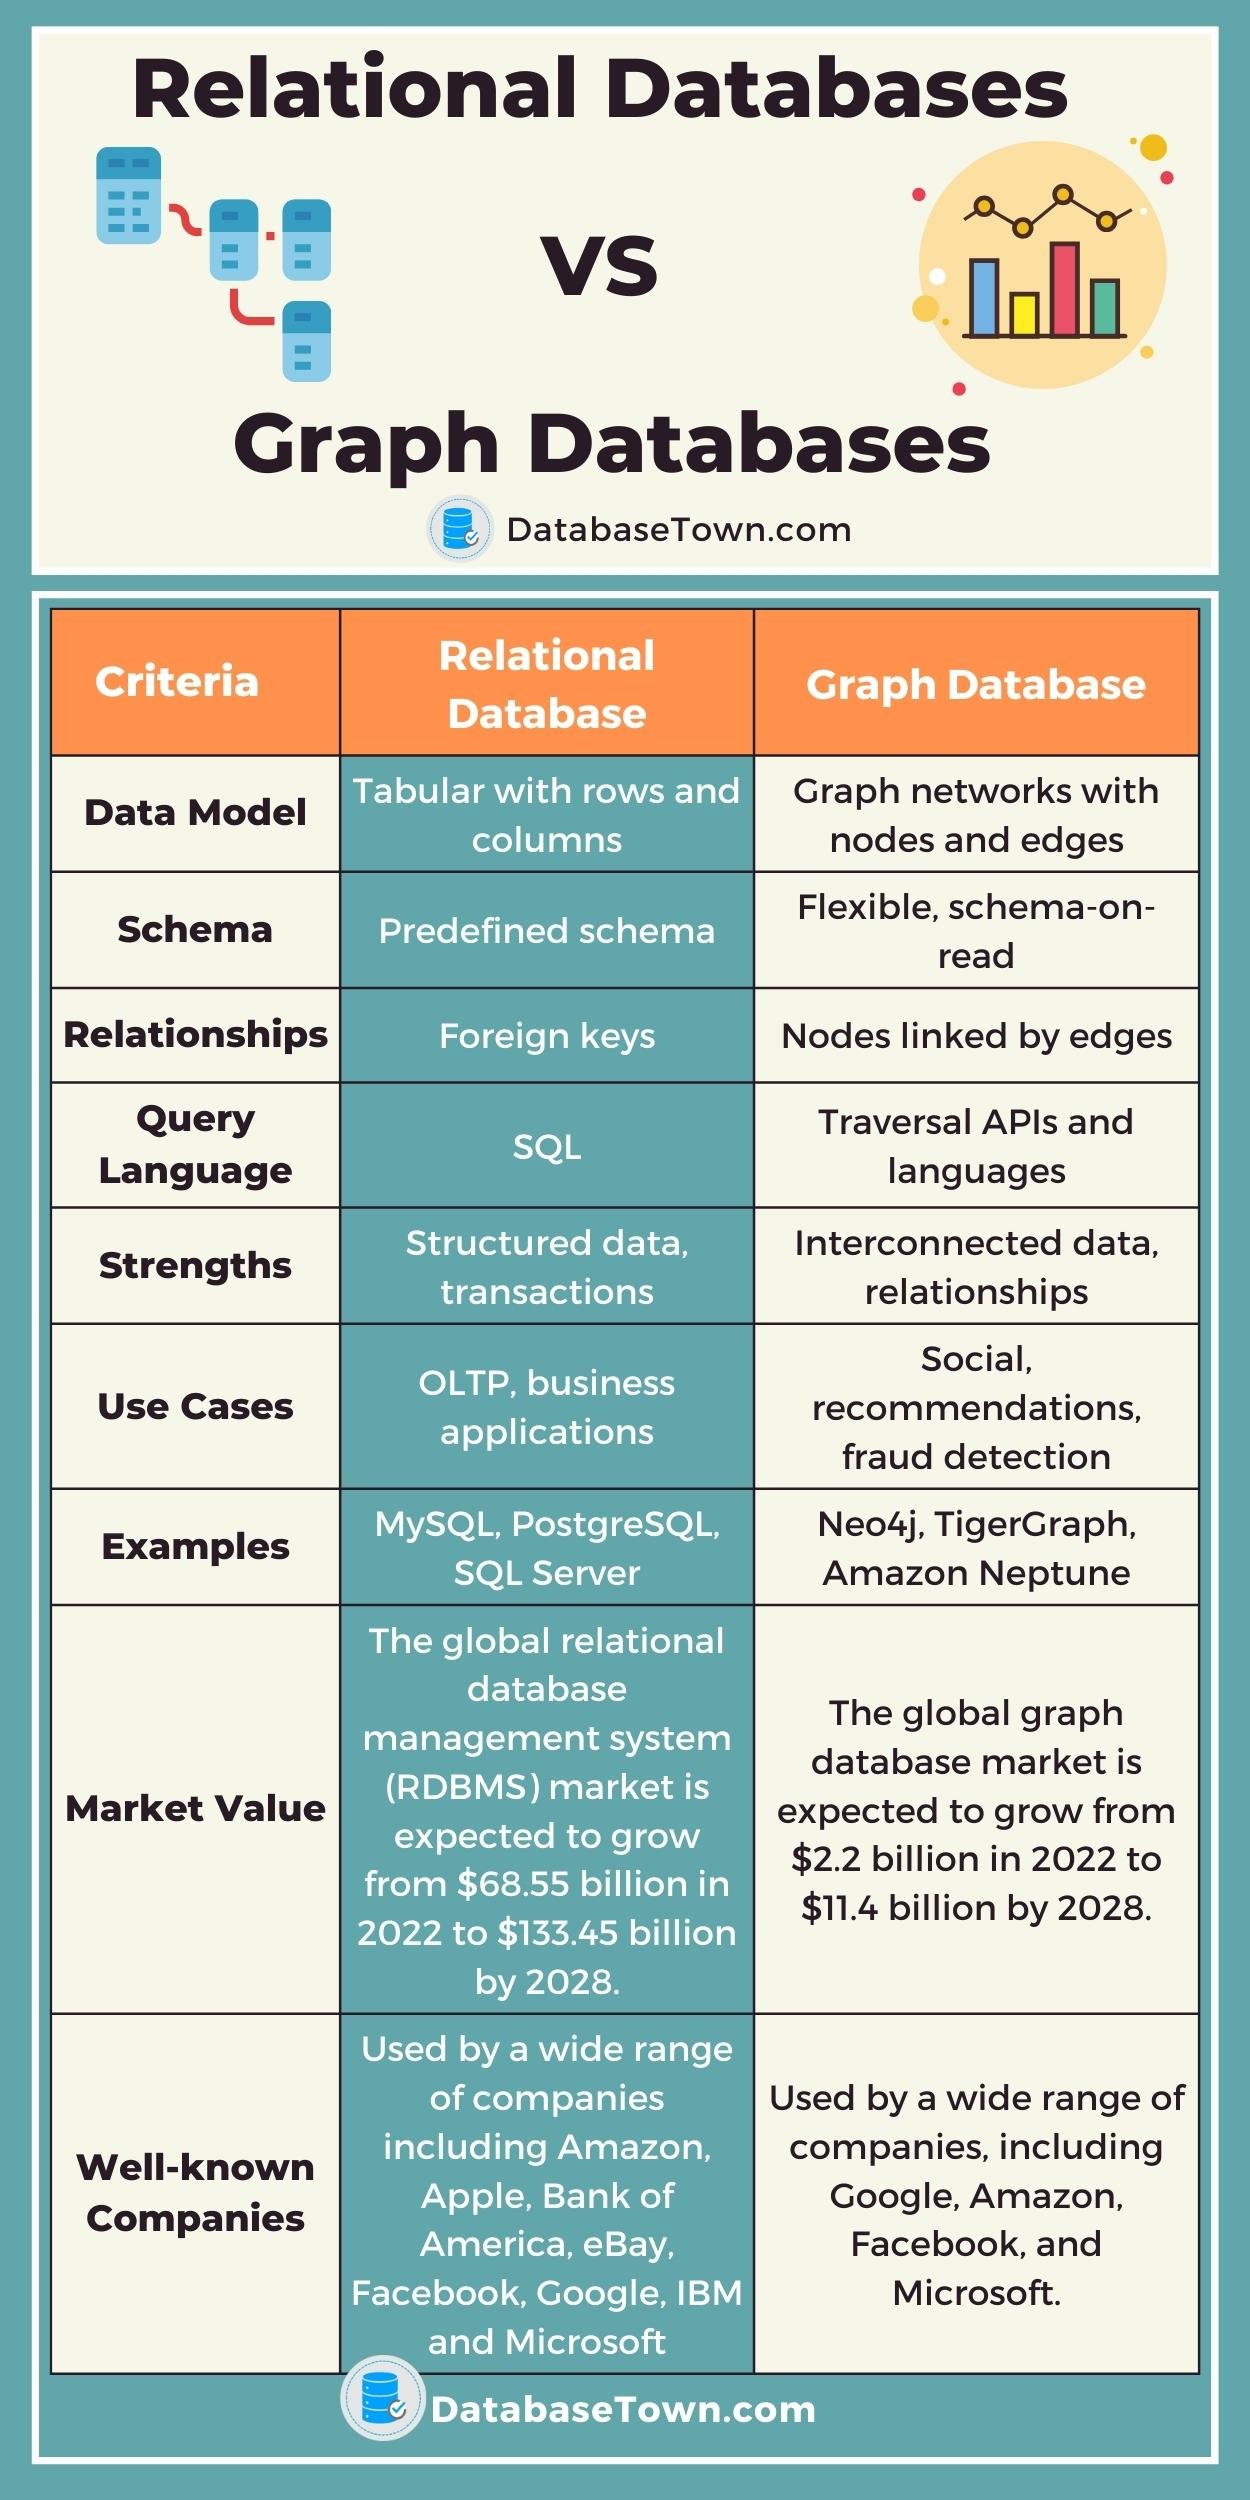 Key differences between Relational Databases VS Graph Databases